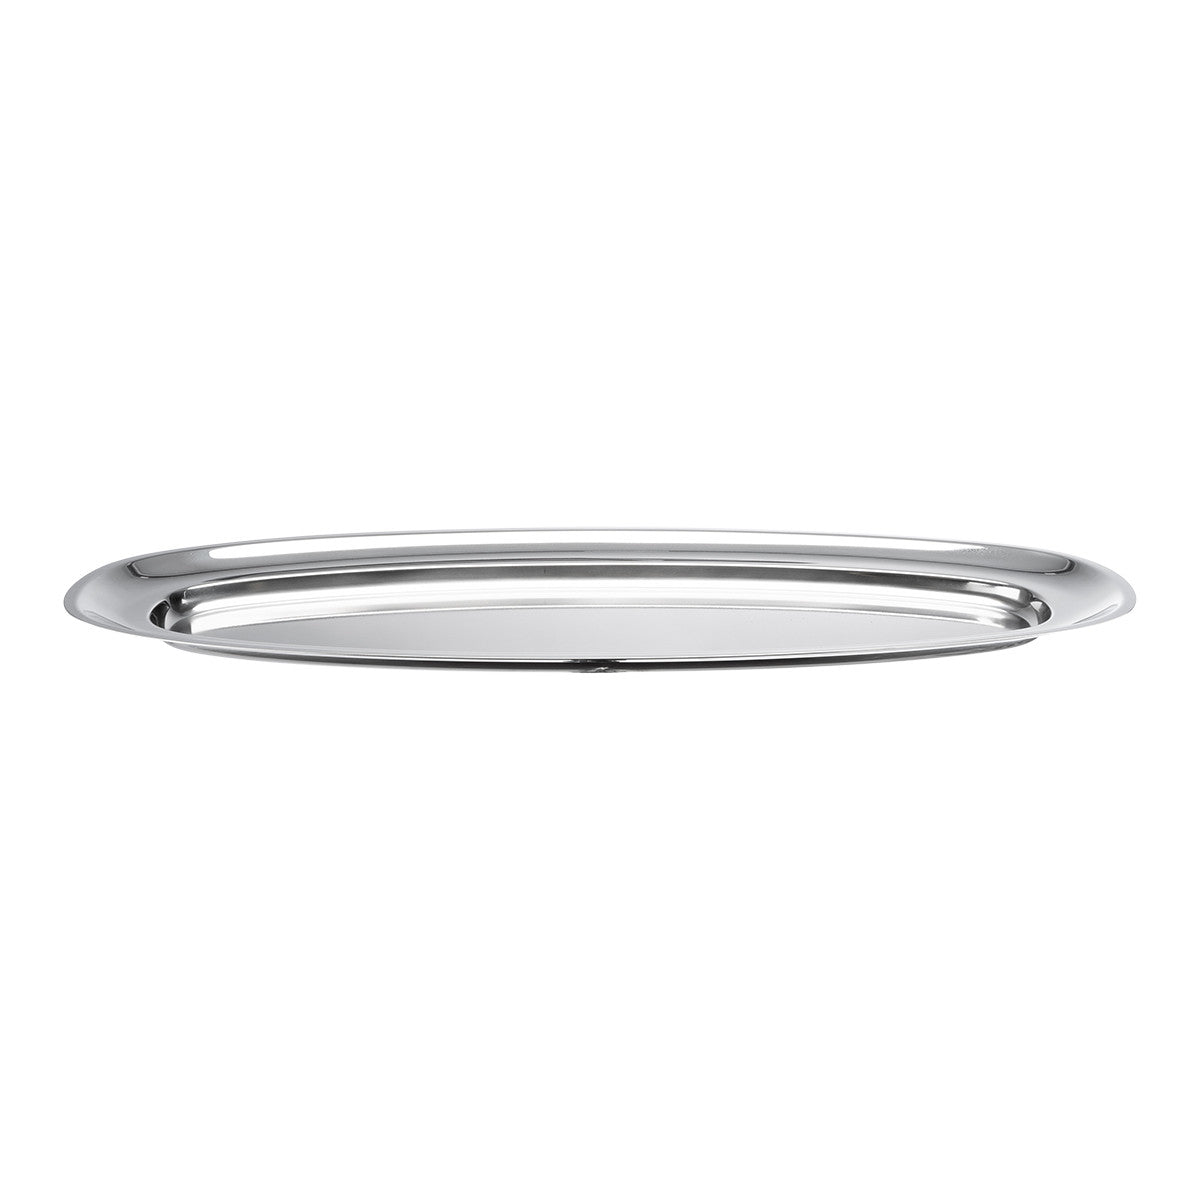 FISH TRAY 60x28 cm, STAINLESS STEEL